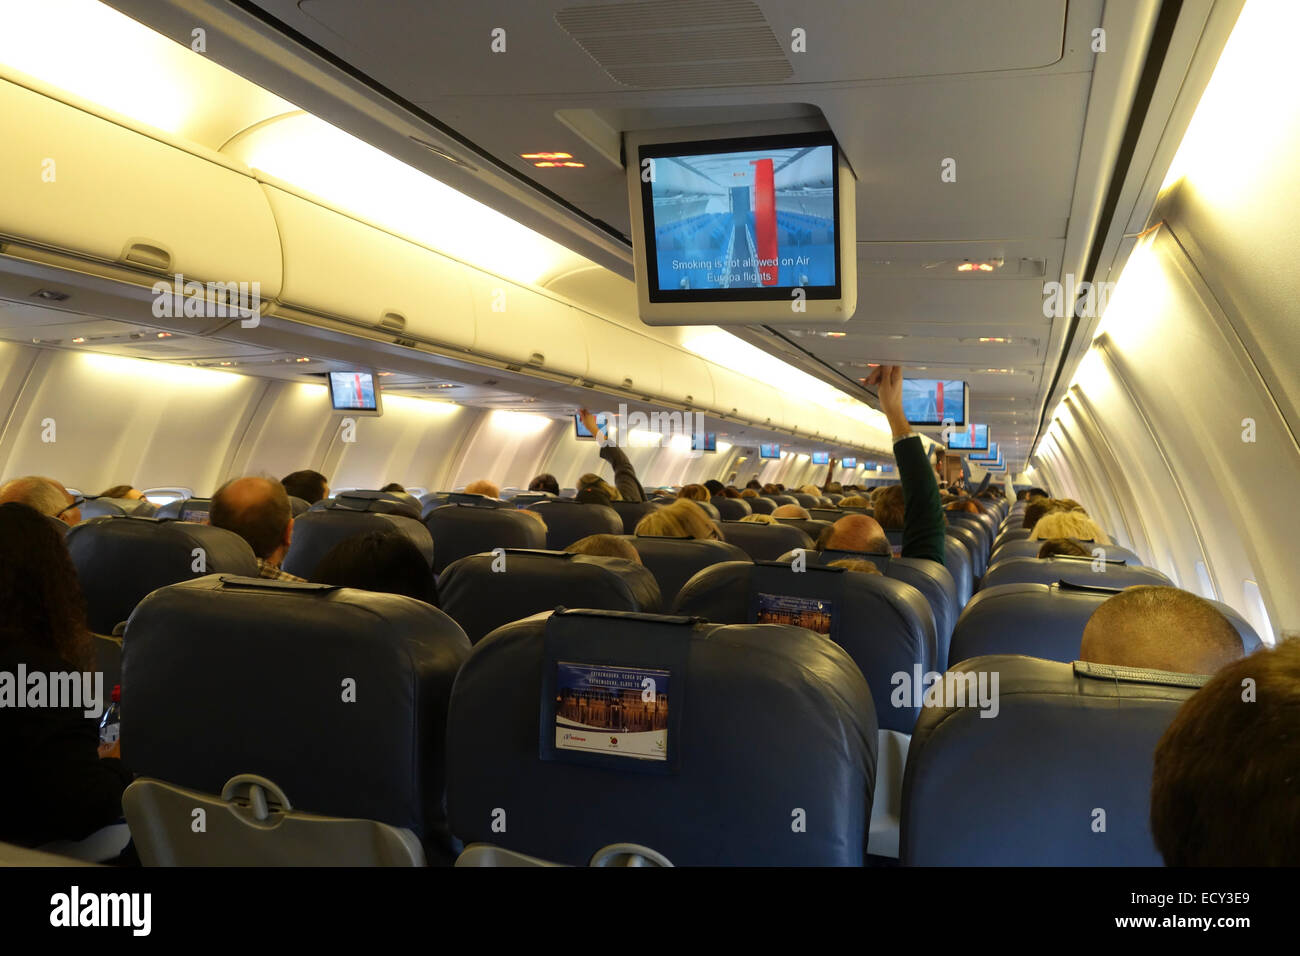 Passengers in short haul, economy class, commercial aircraft seated for takeoff, Air Europa. Stock Photo